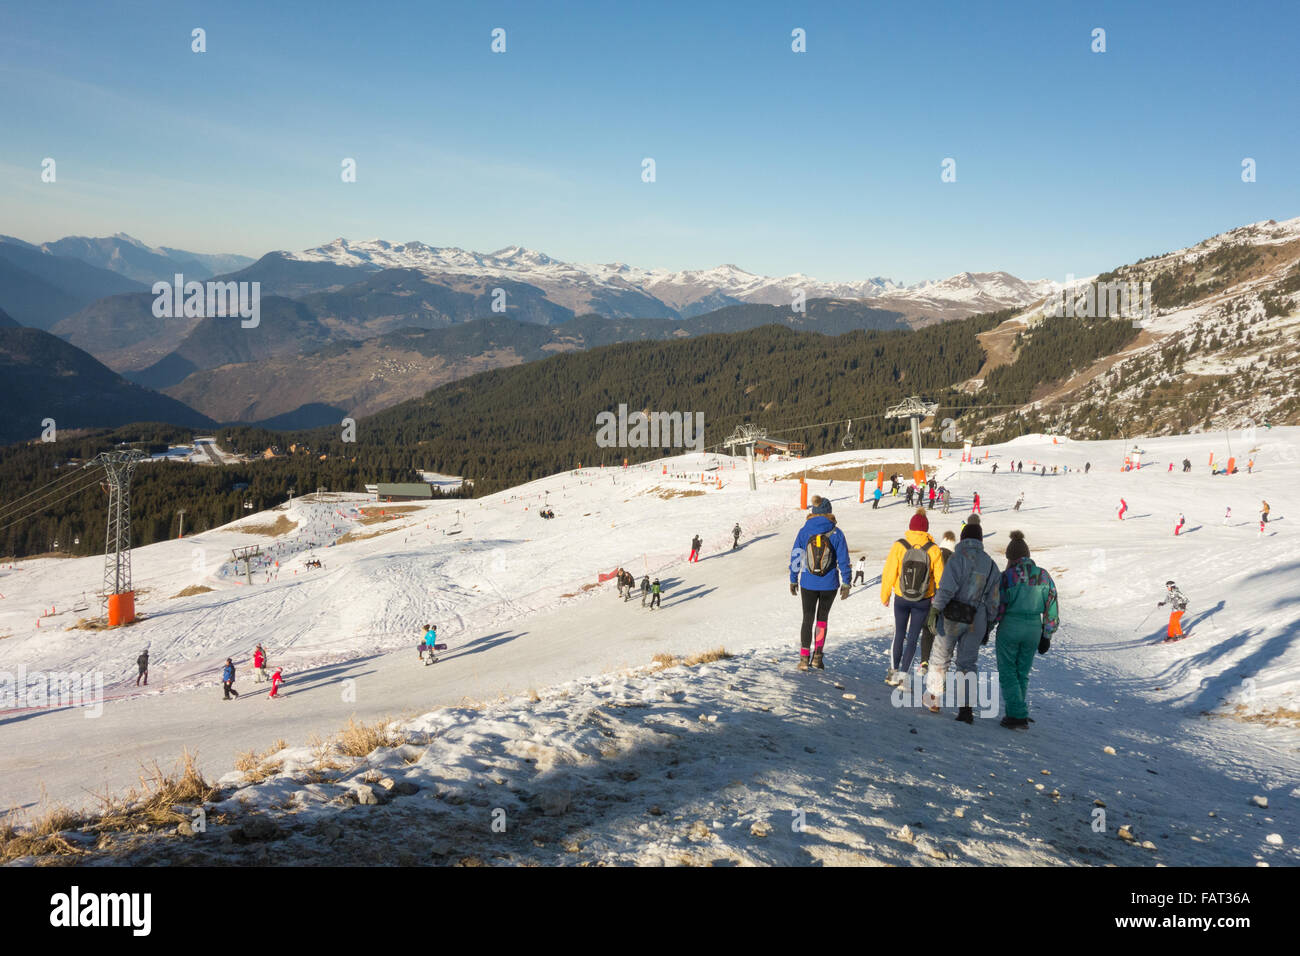 Meribel, France - walkers and skiers mingle on the slopes during a period of unseasonably warm weather int he French Alps Stock Photo